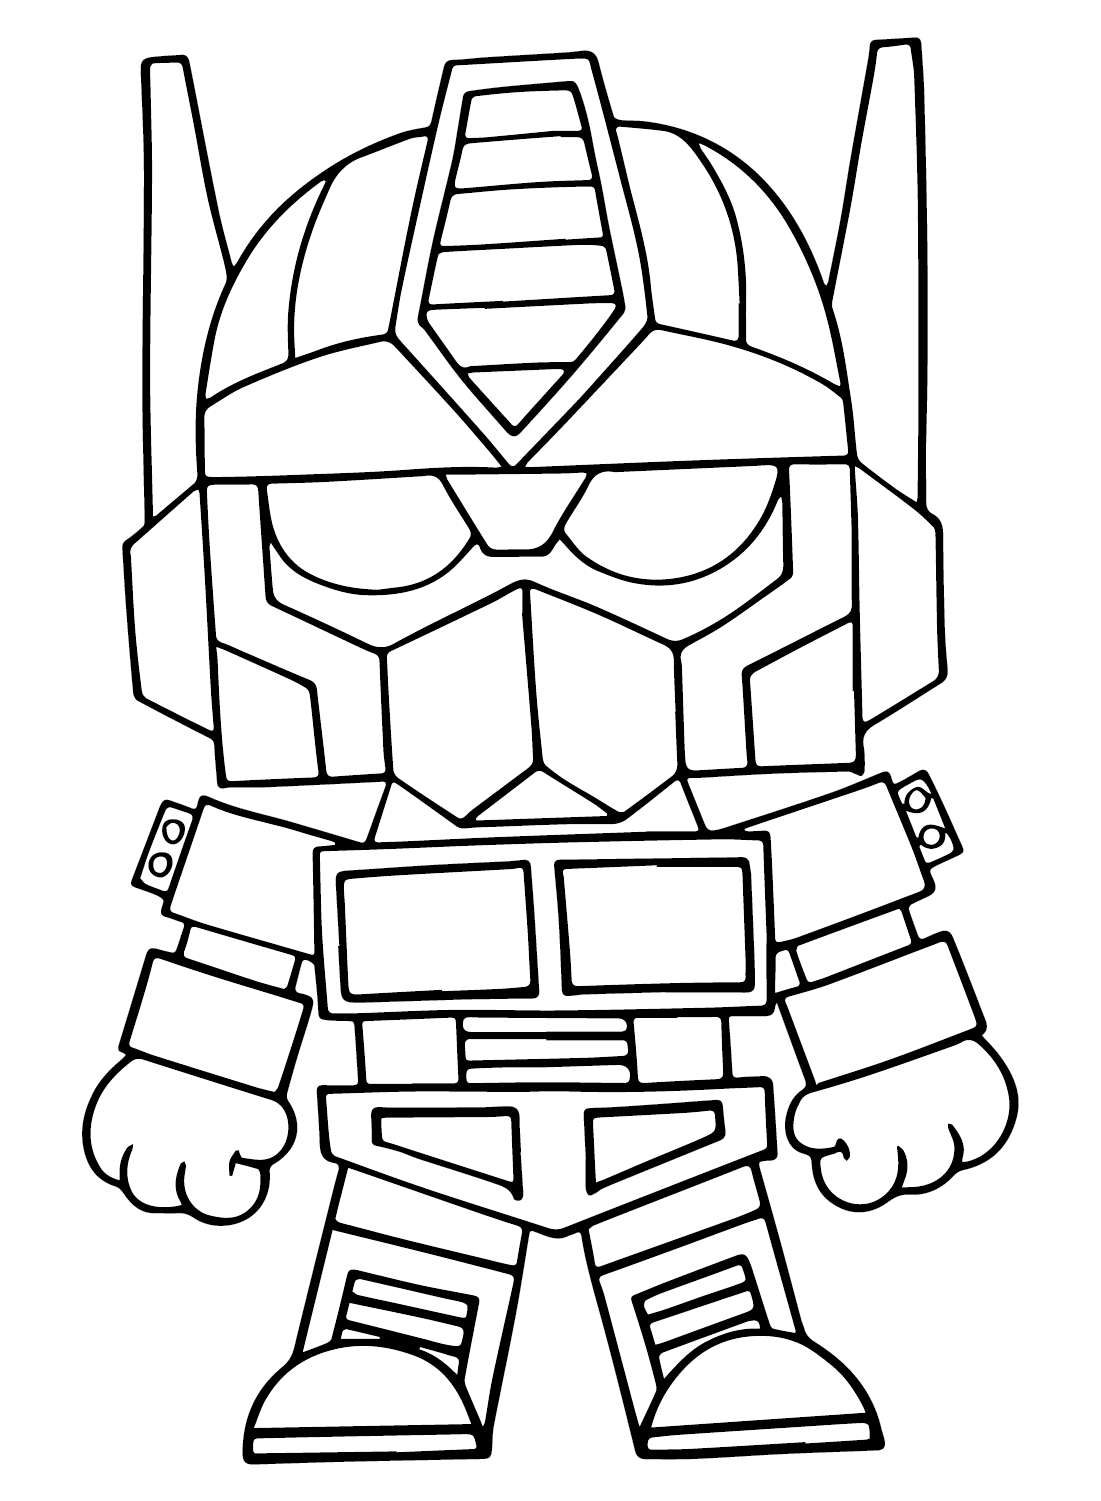 Transformers Coloring Page